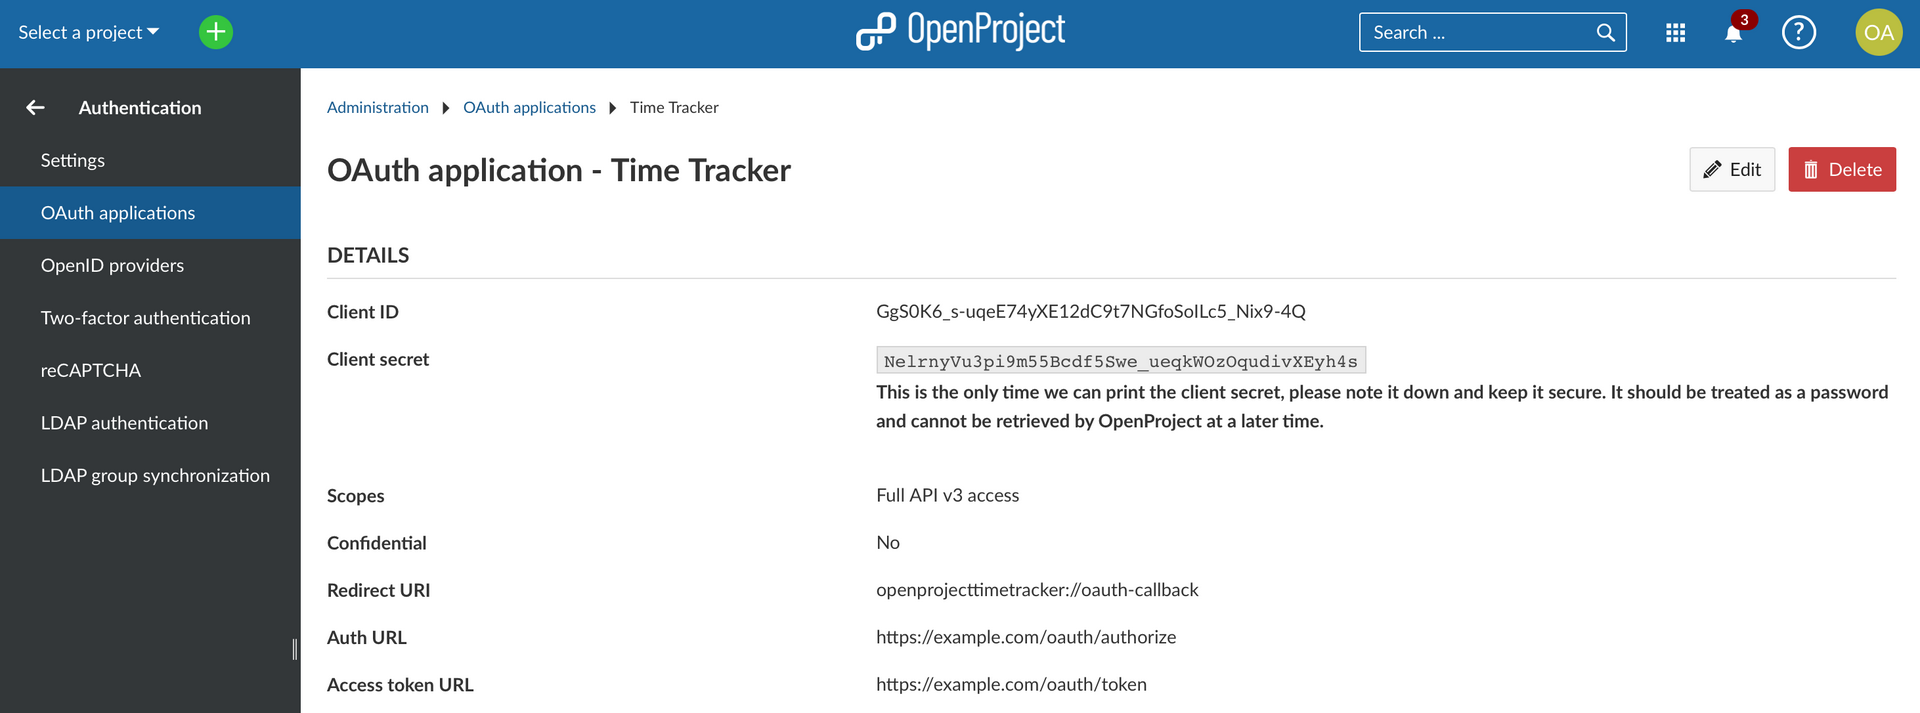 openproject time tracker configured